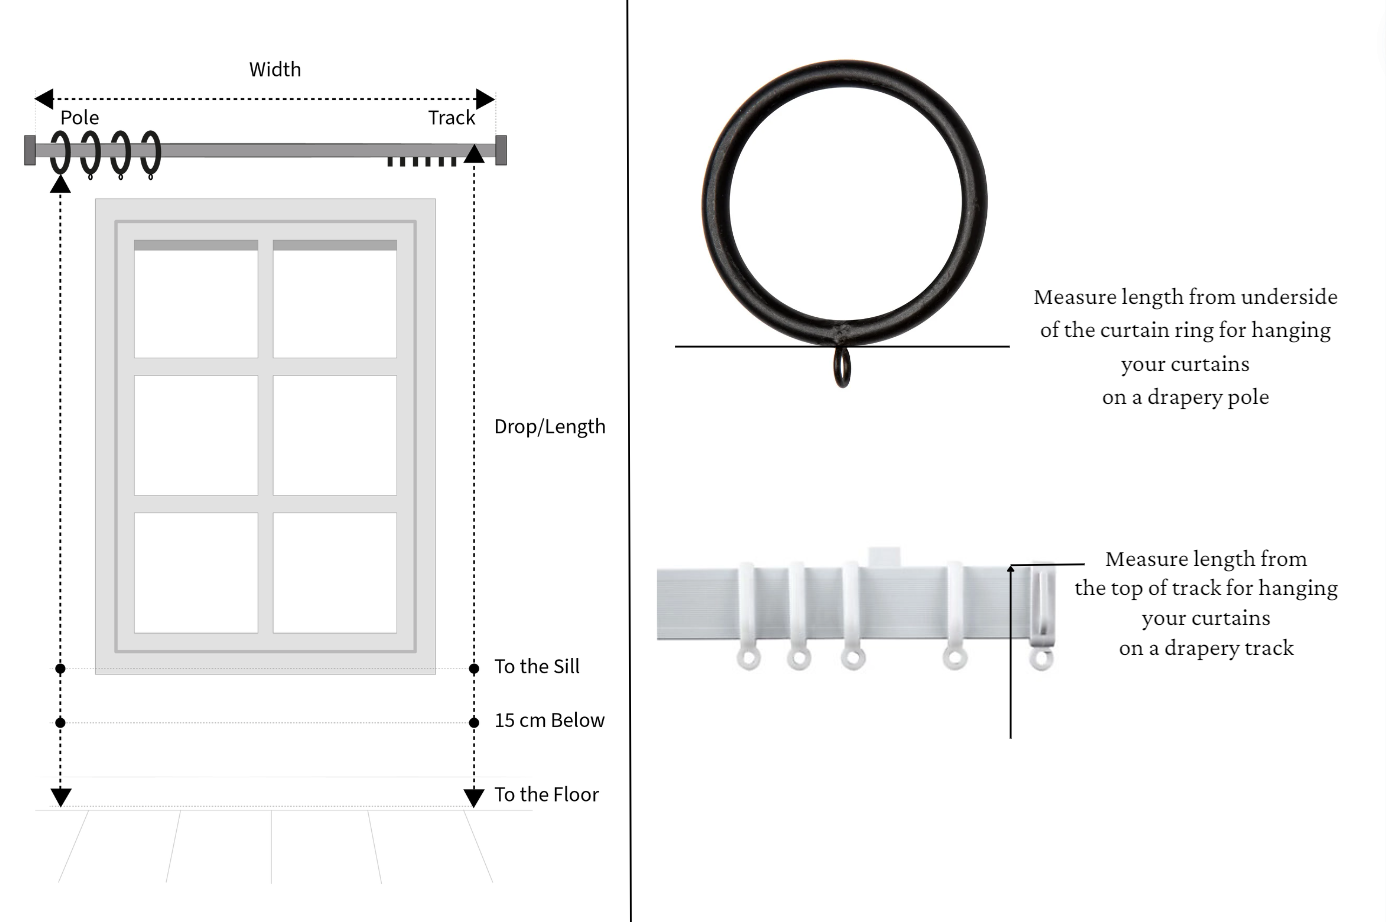 How to measure curtain length